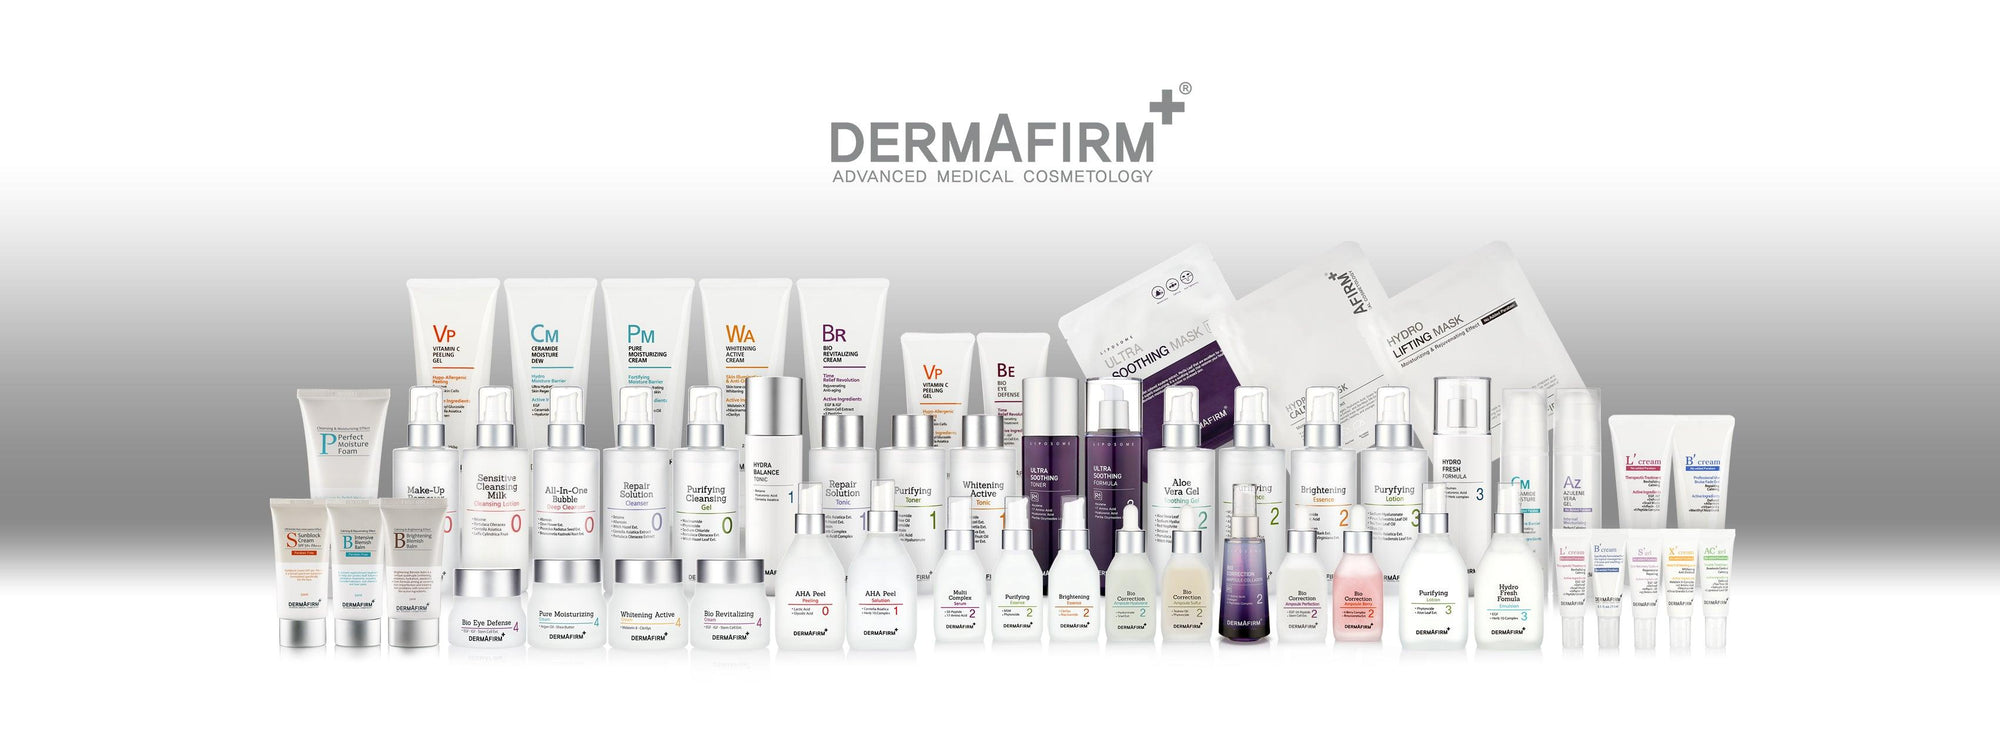 Dermafirm USA Skincare Products